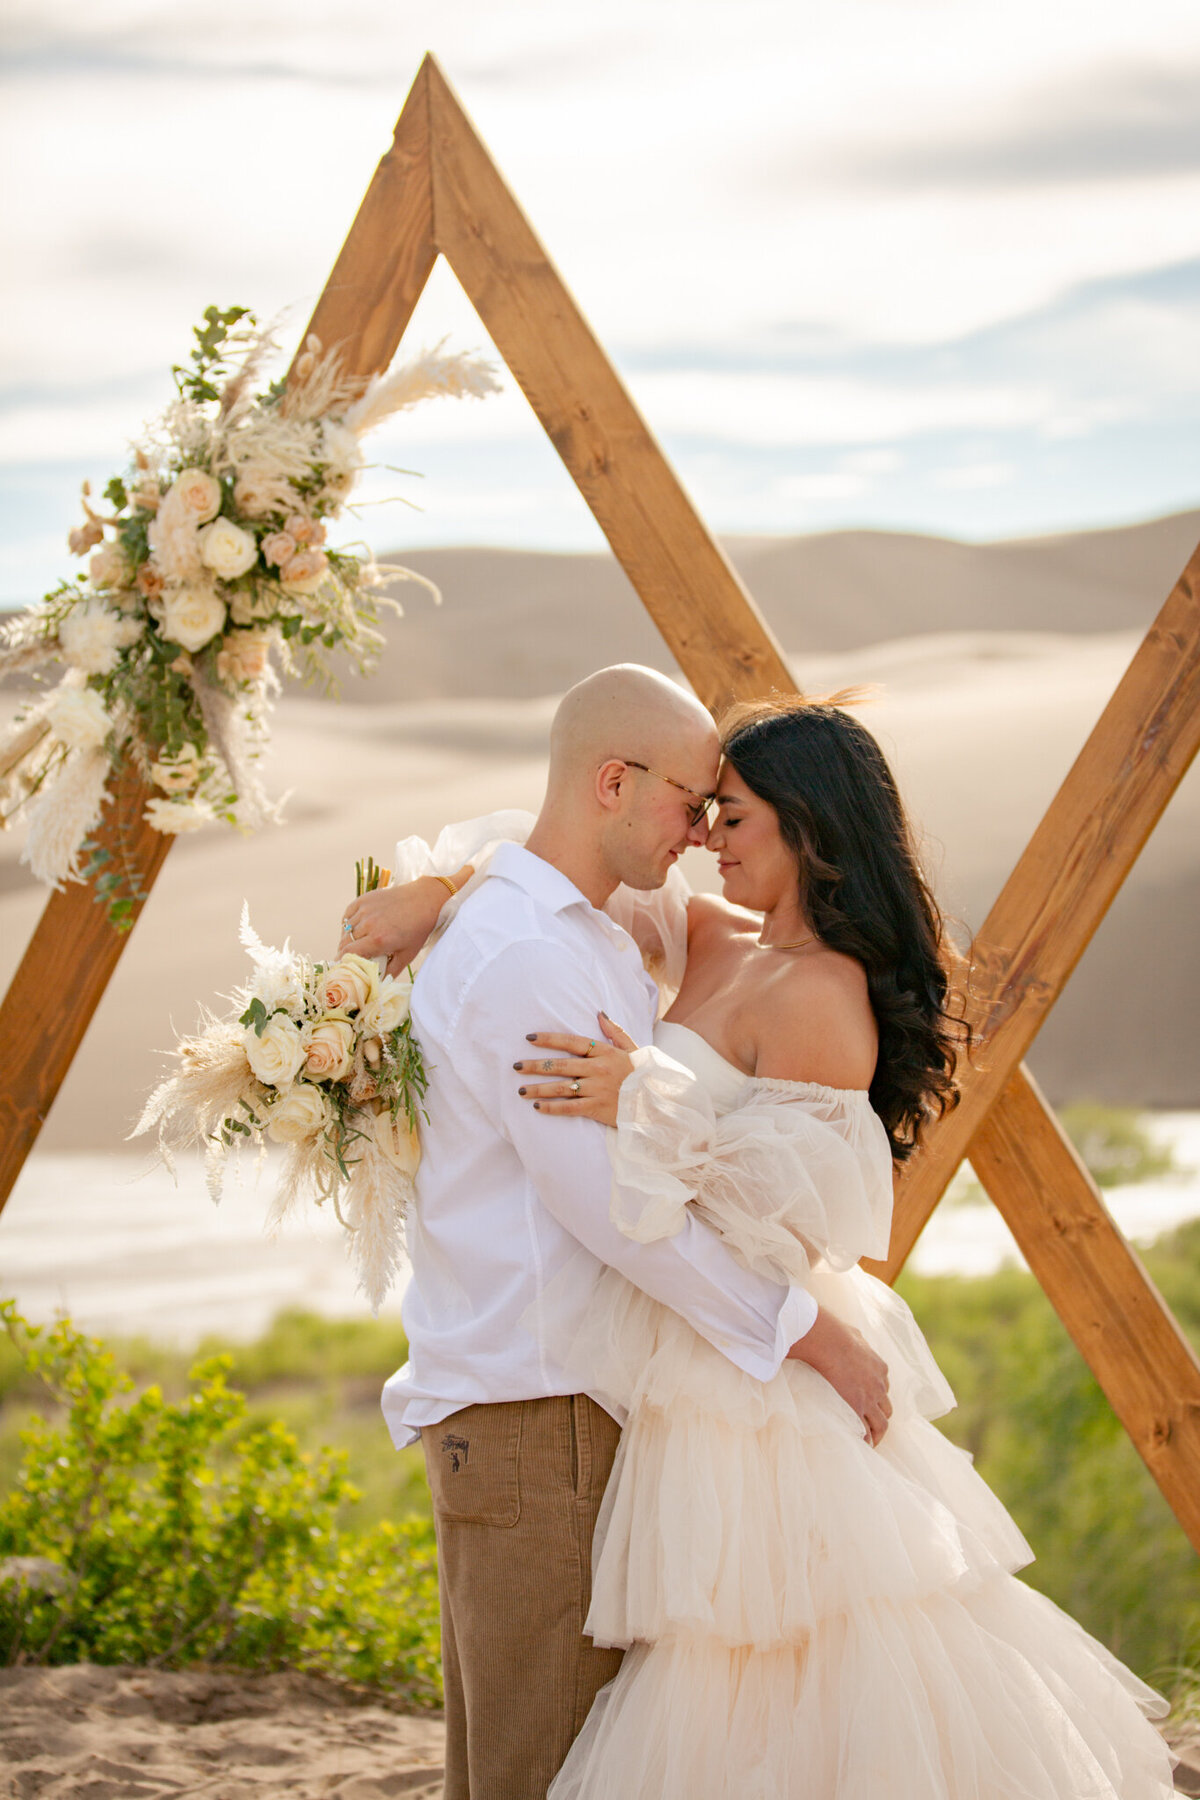 Bride and groom hold each other close during their ceremony at the sand dunes